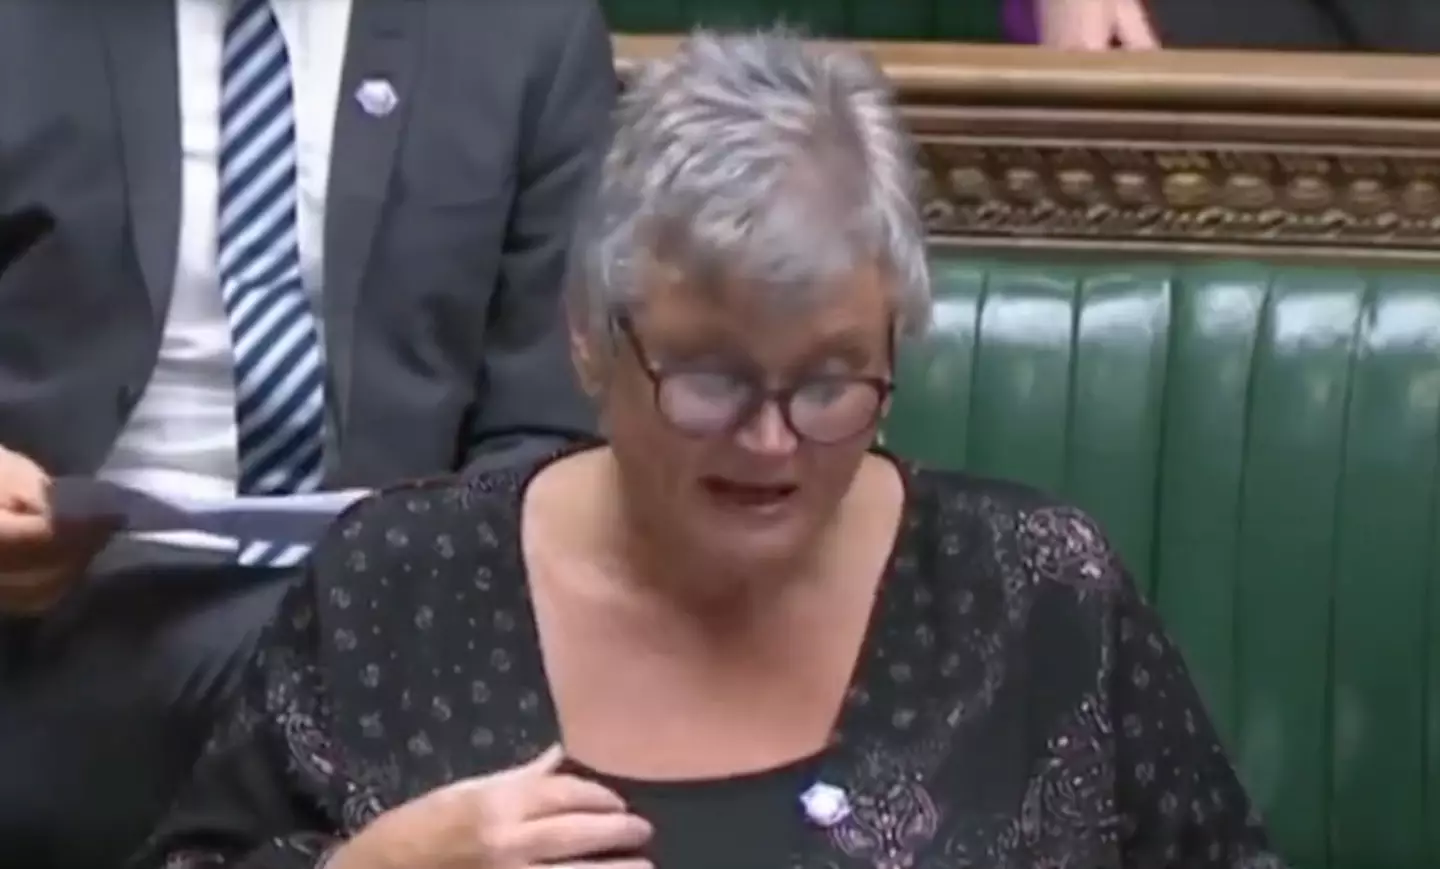 Carolyn discussed the bill in parliament (